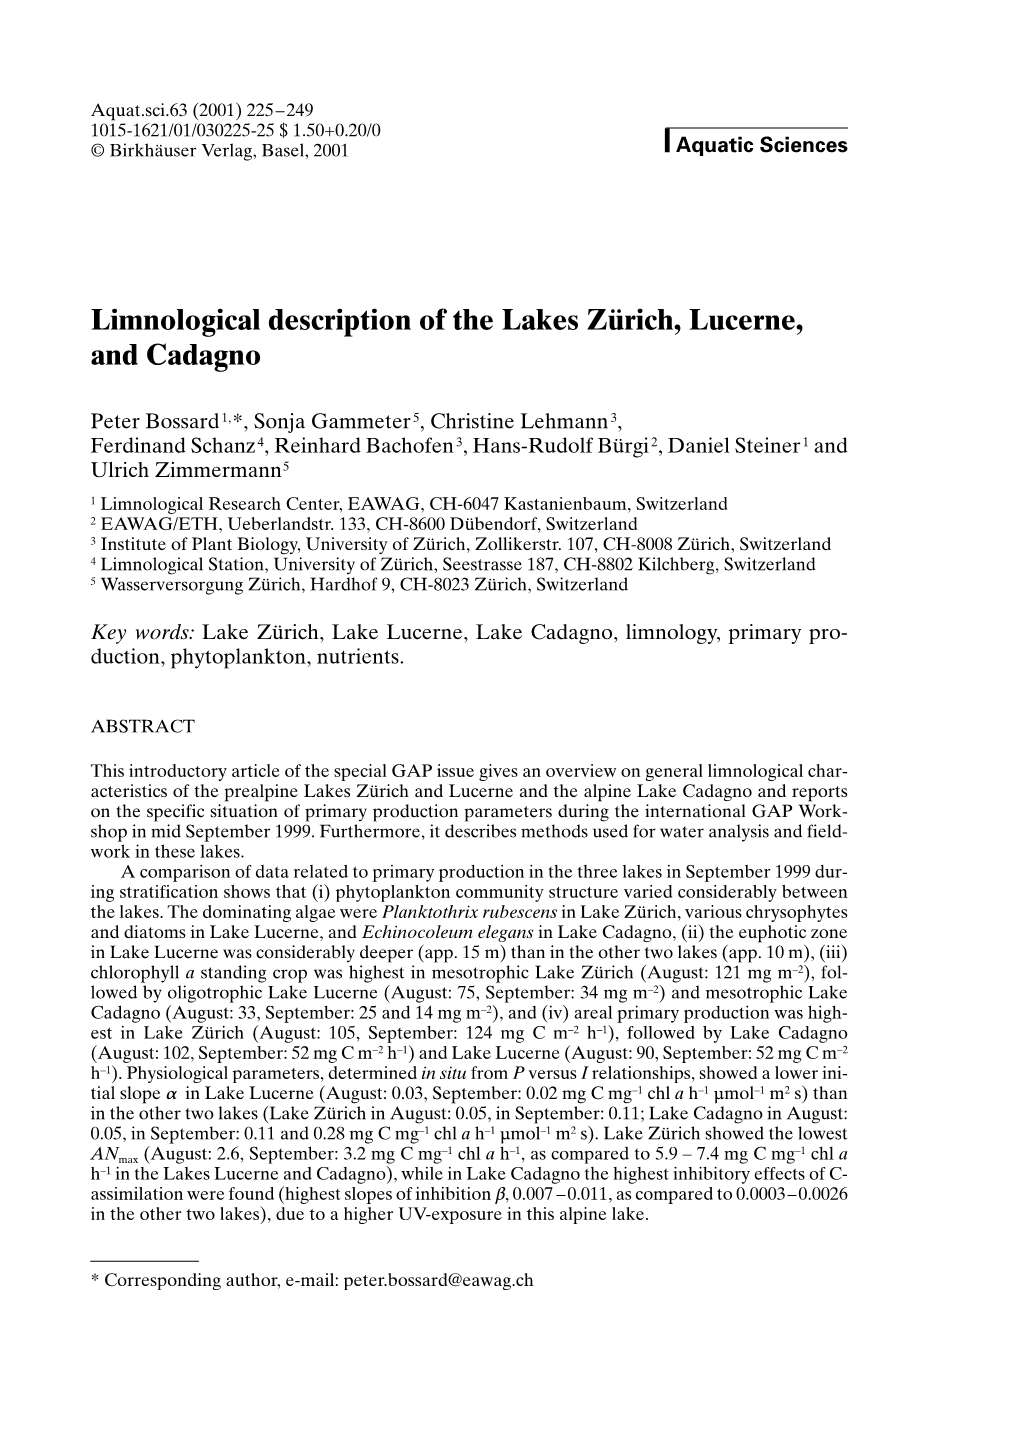 Limnological Description of the Lakes Zürich, Lucerne, and Cadagno